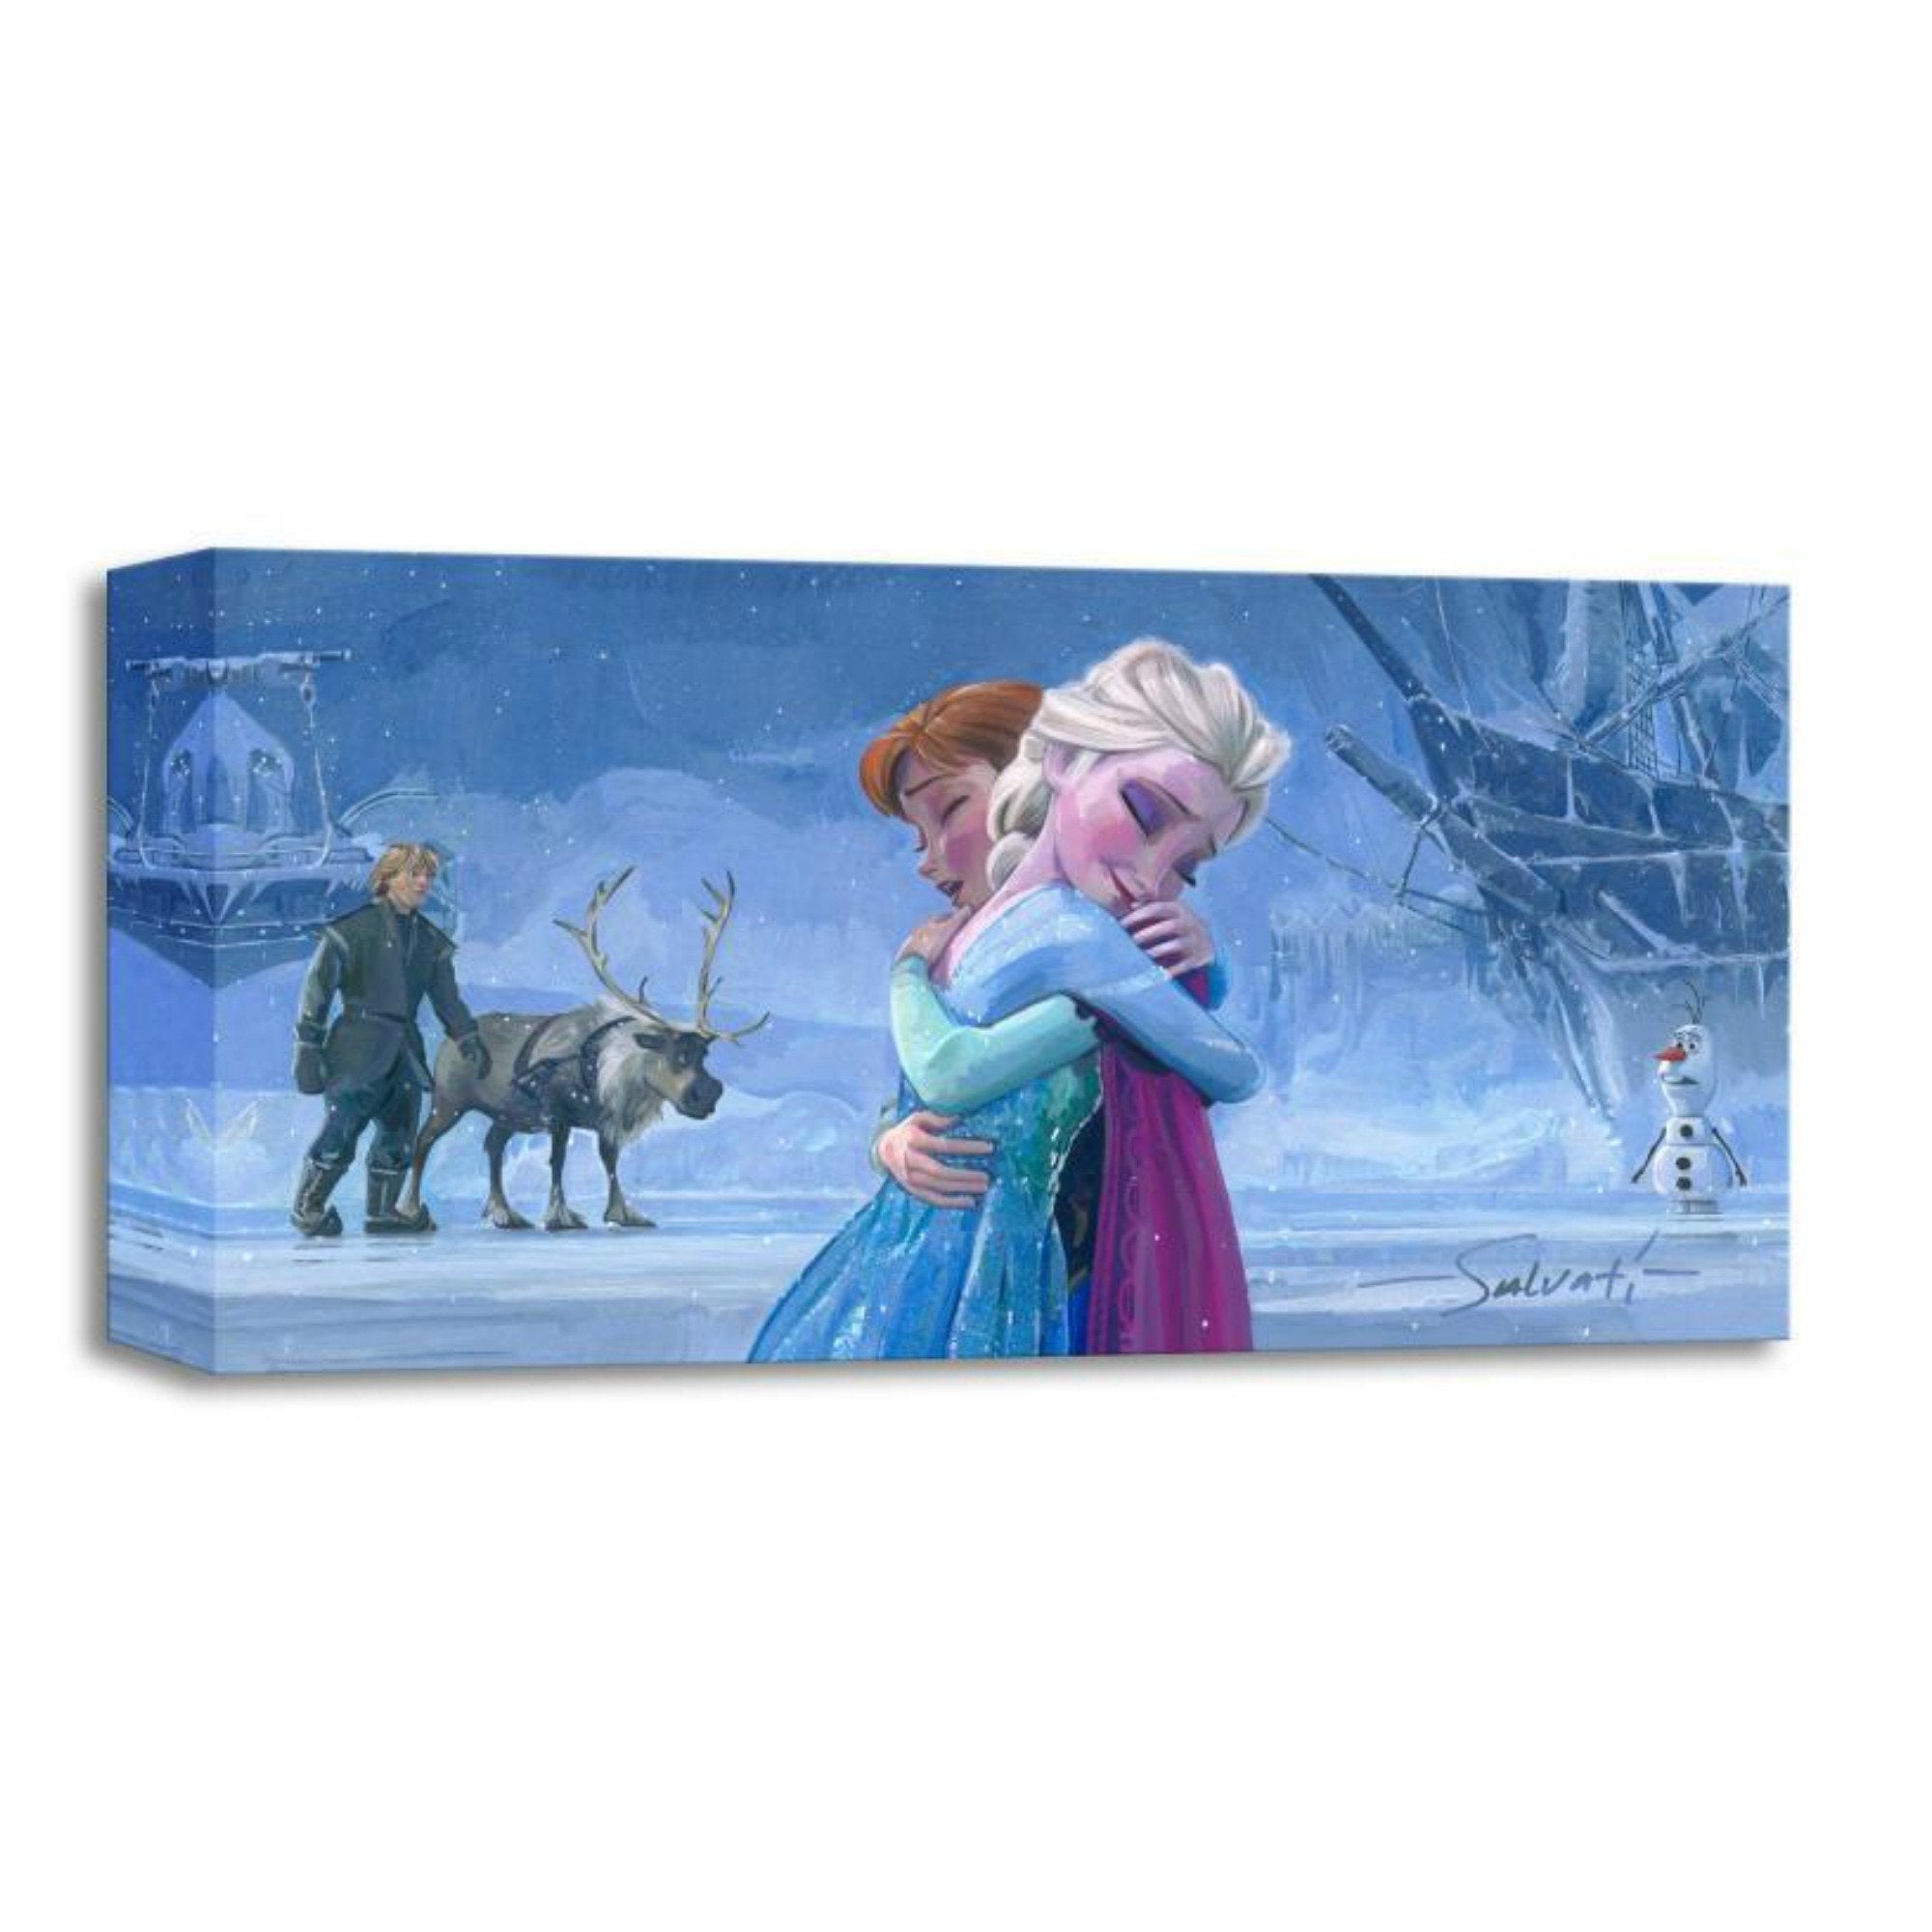 The Warmth of Love by Michelle St. Laurent.   Inspired by Disney film's "Frozen". Elsa and Anna sharing a sisterly love embrace.